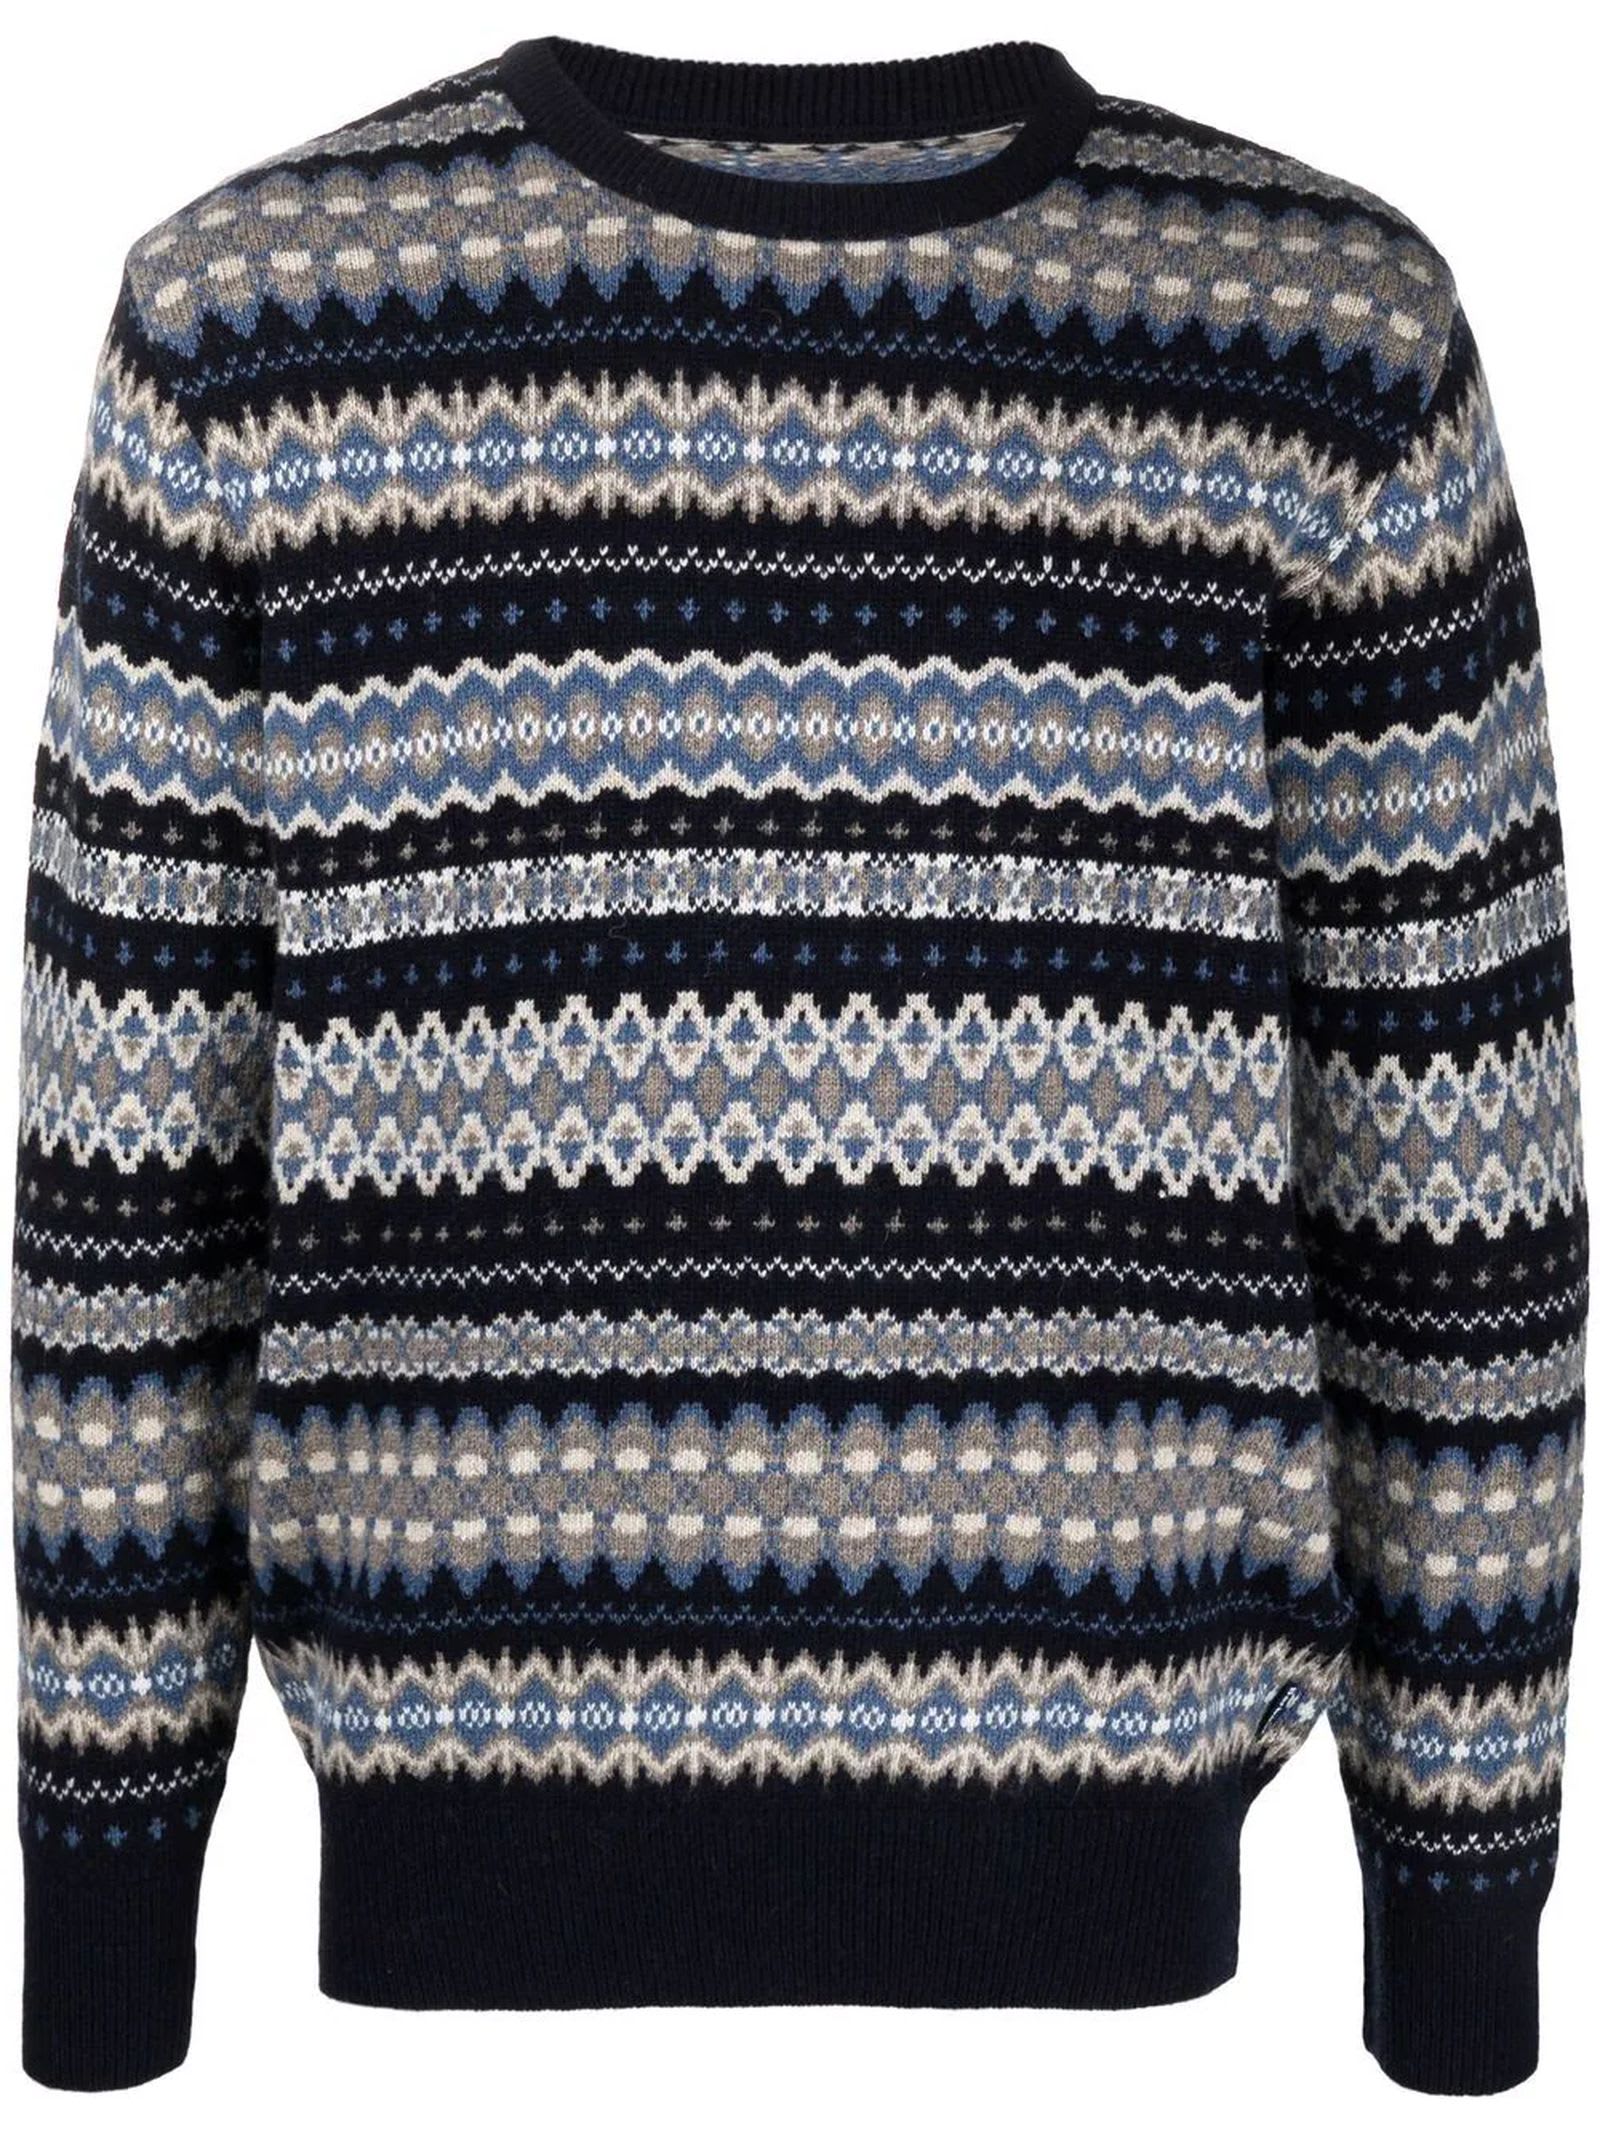 Barbour Navy-blue And White Wool Jumper